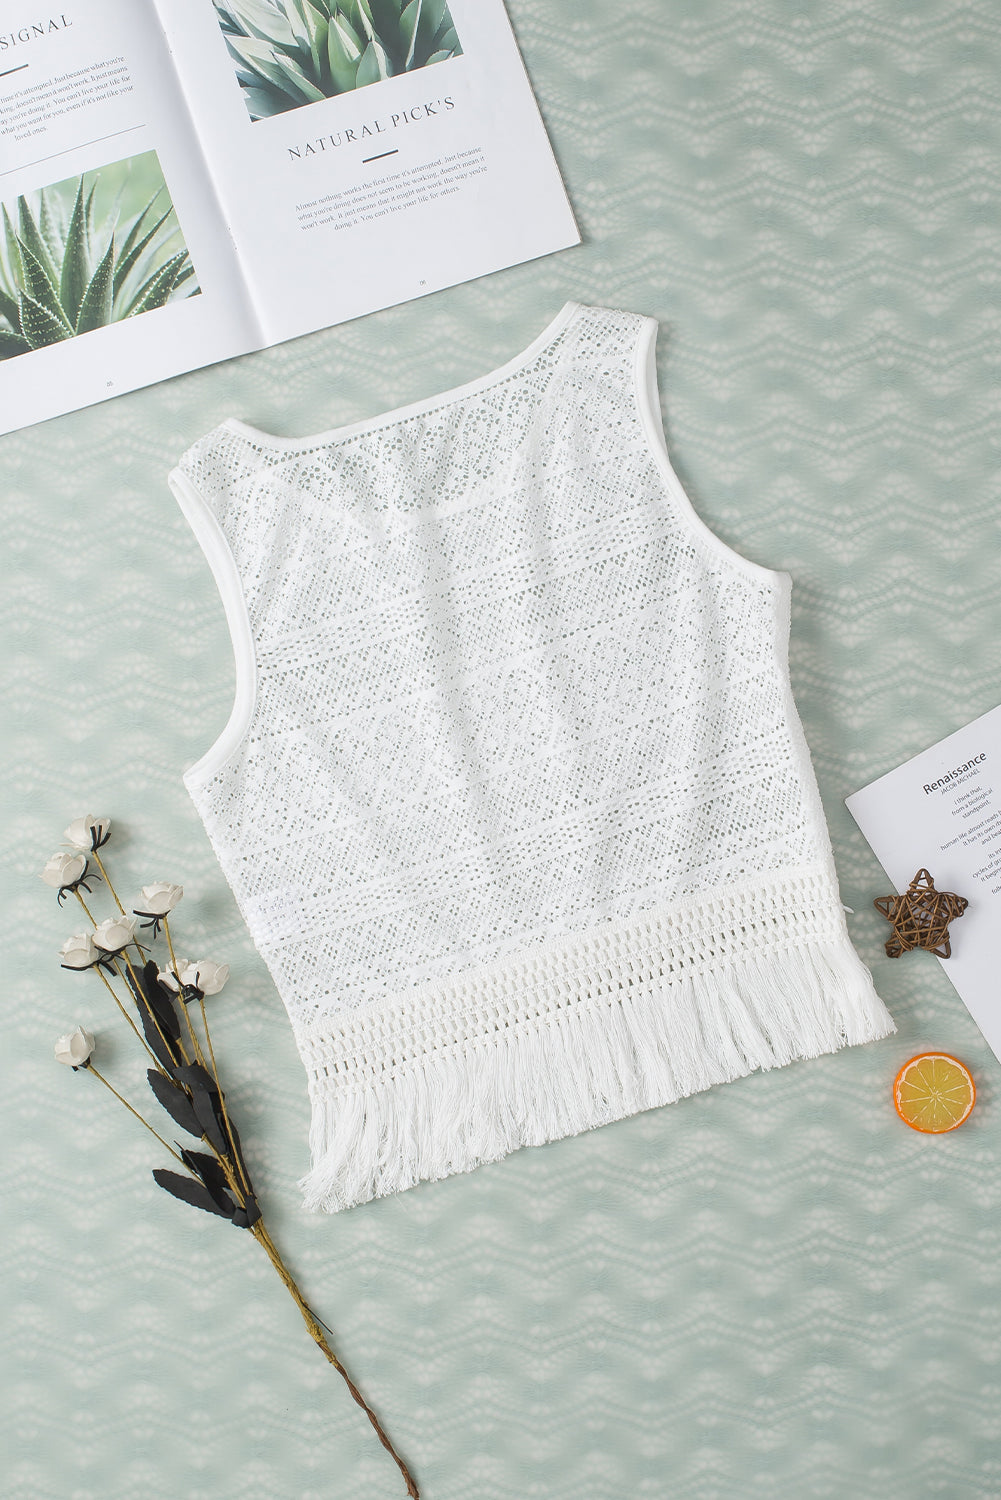 White Lace Crochet Hollow out Fringed Tank Top